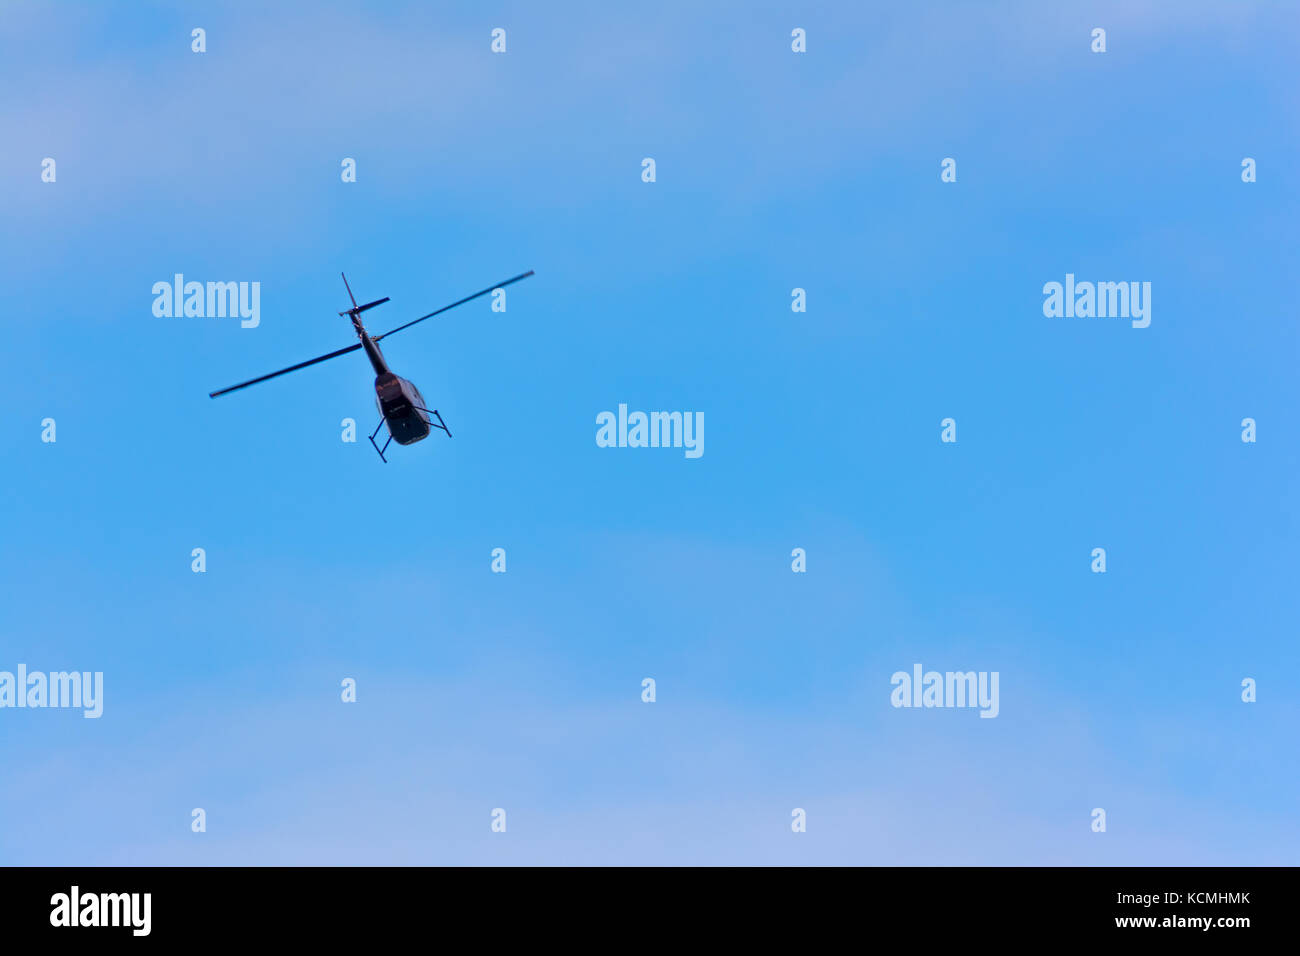 Helicopter flying through blue skies with soft clouds Stock Photo